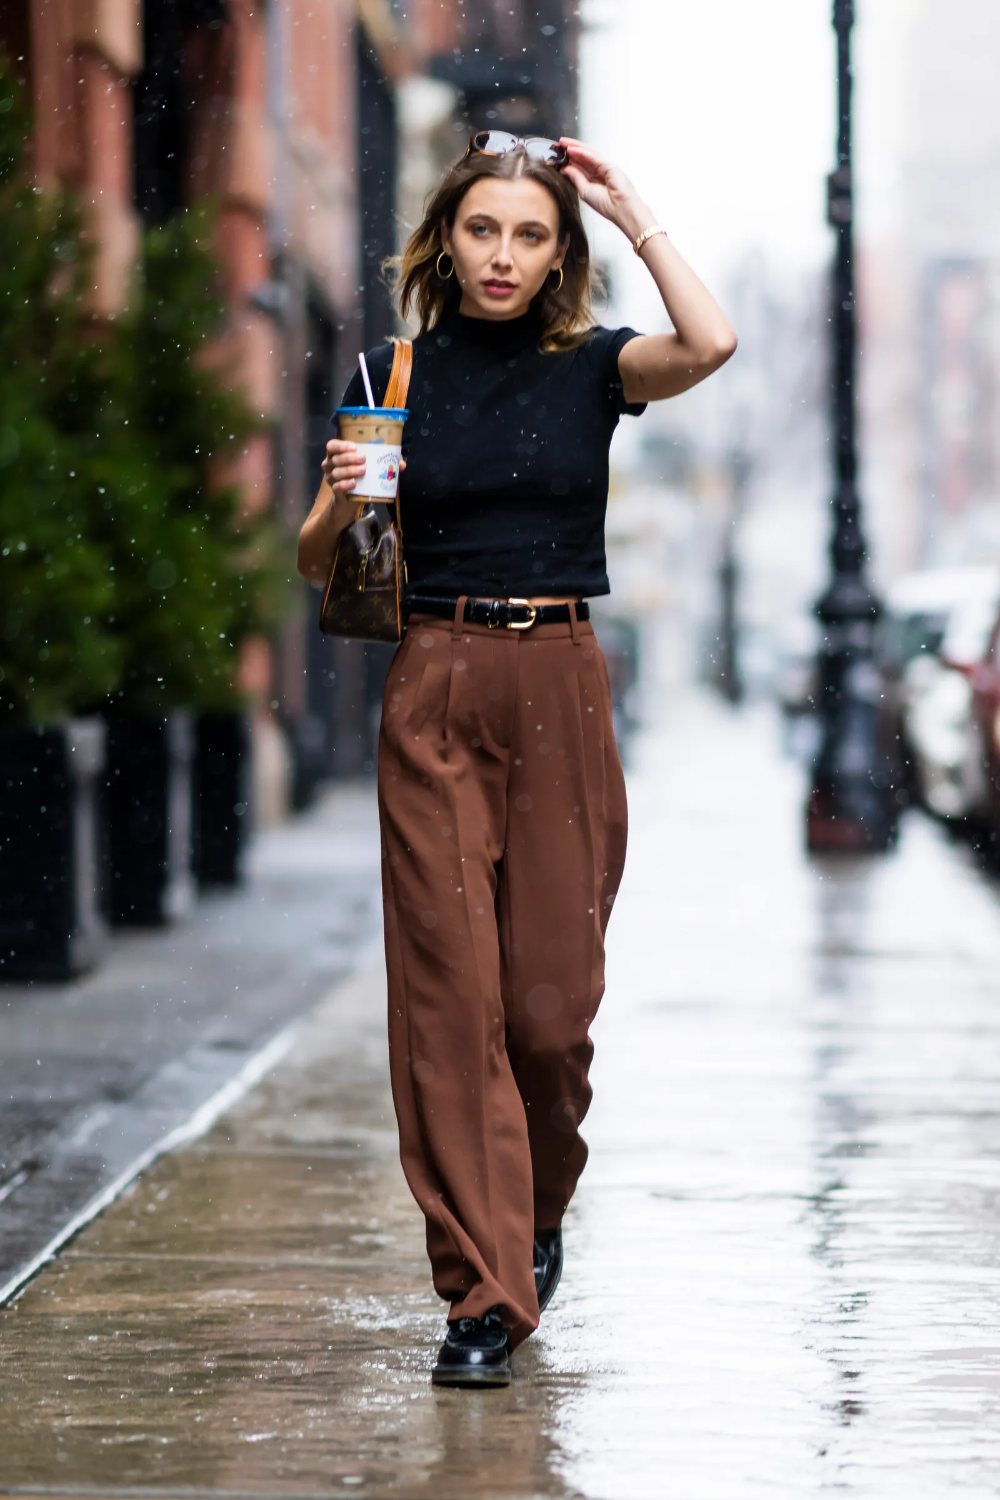 Baggy Pants Are the Latest Celeb-Favorite Trend